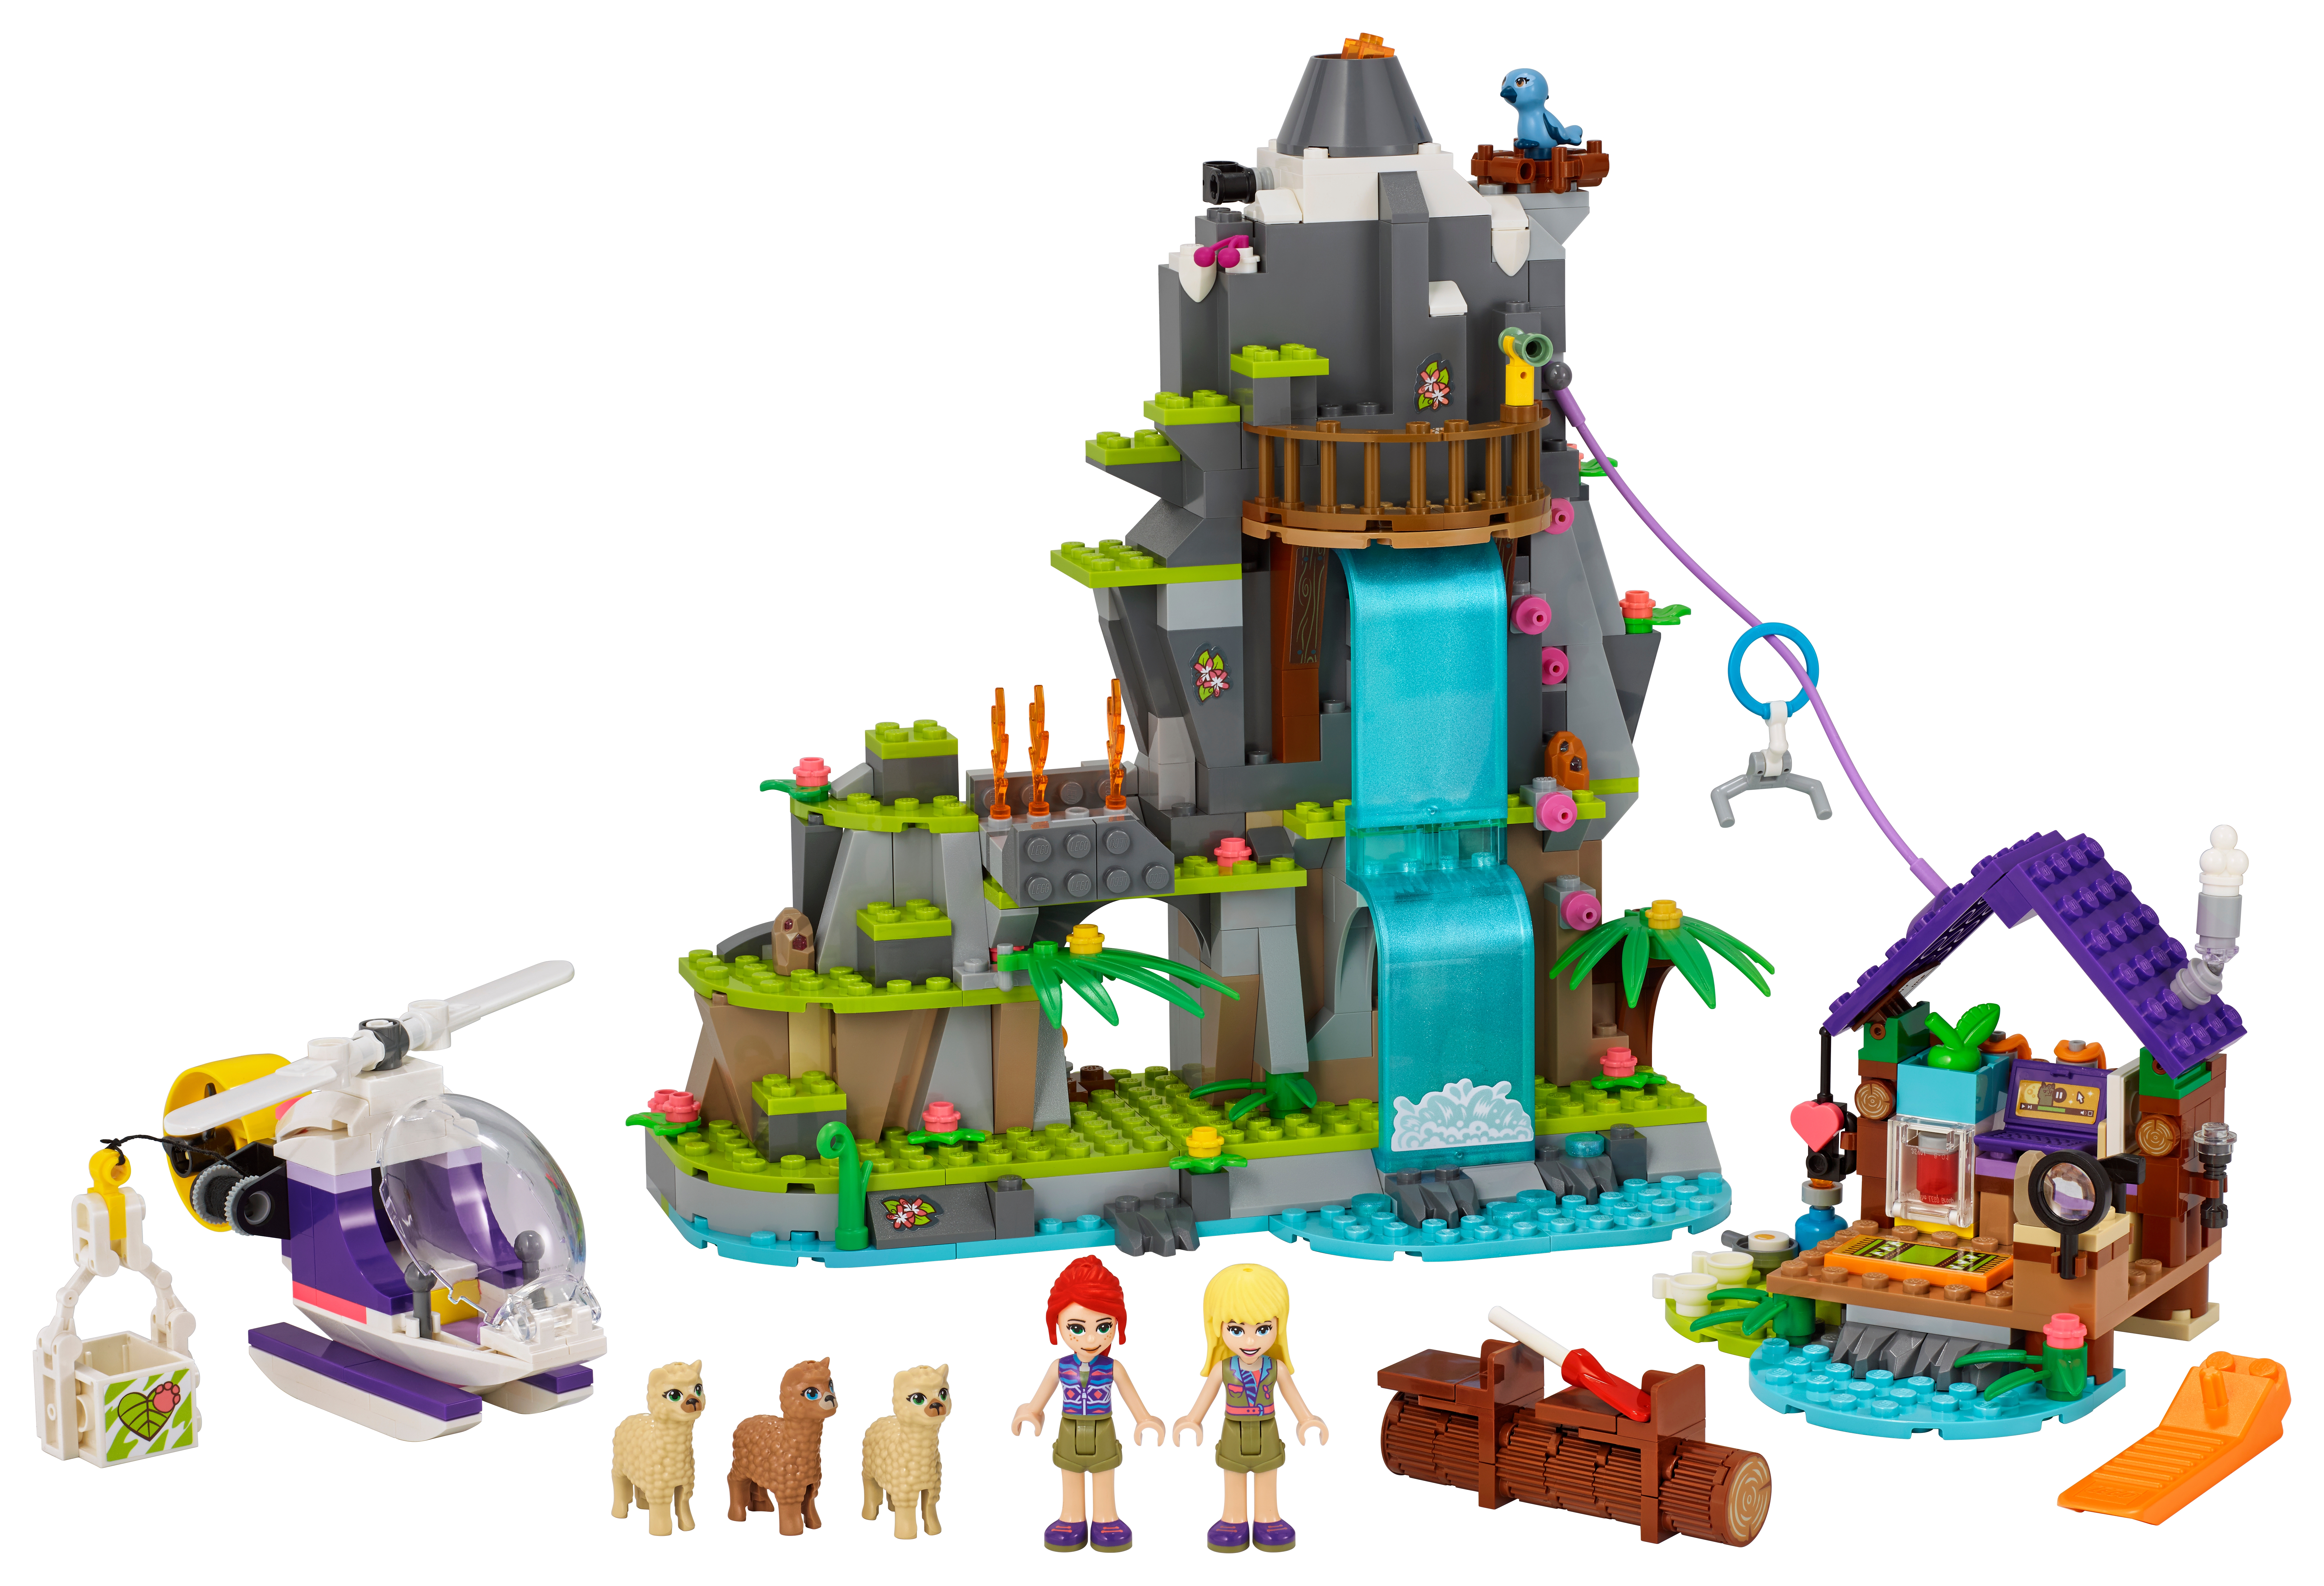 cheap lego sets for girls